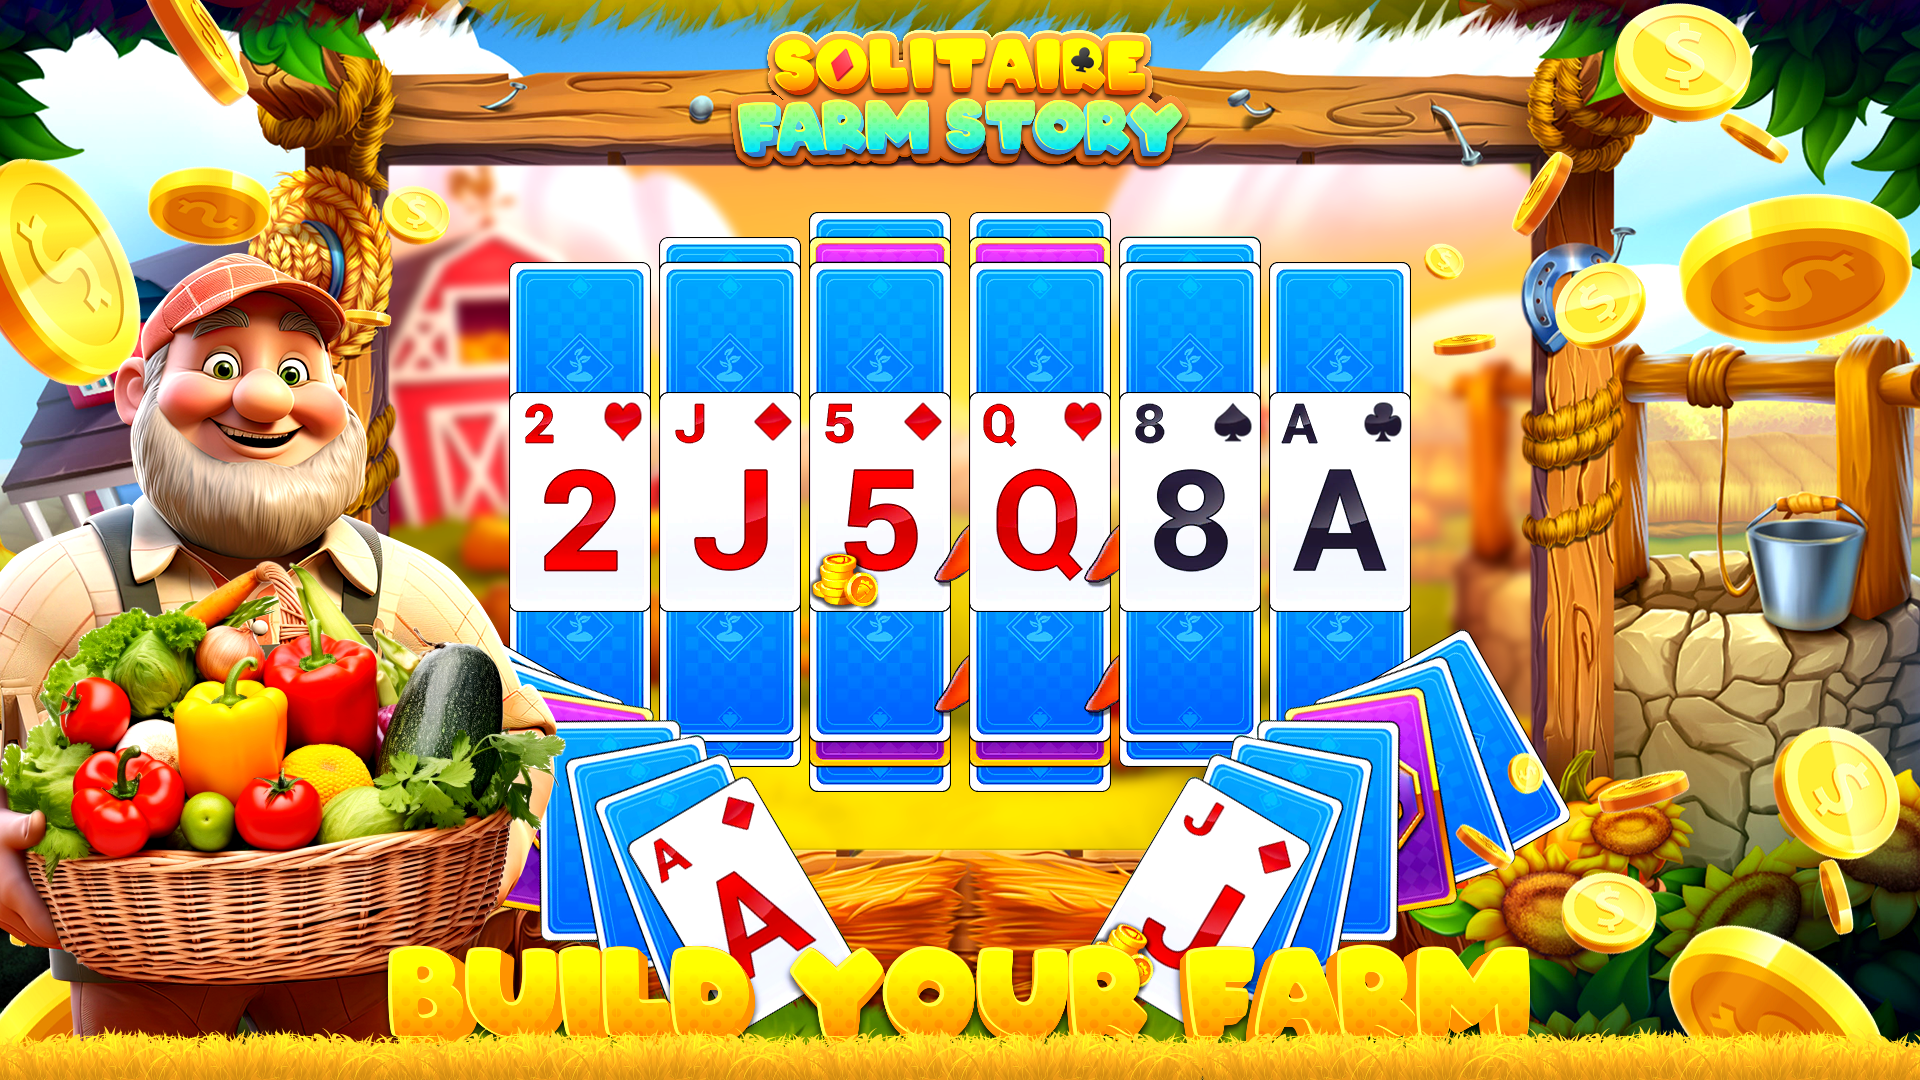 Screenshot of Solitaire Card Game Farm Story